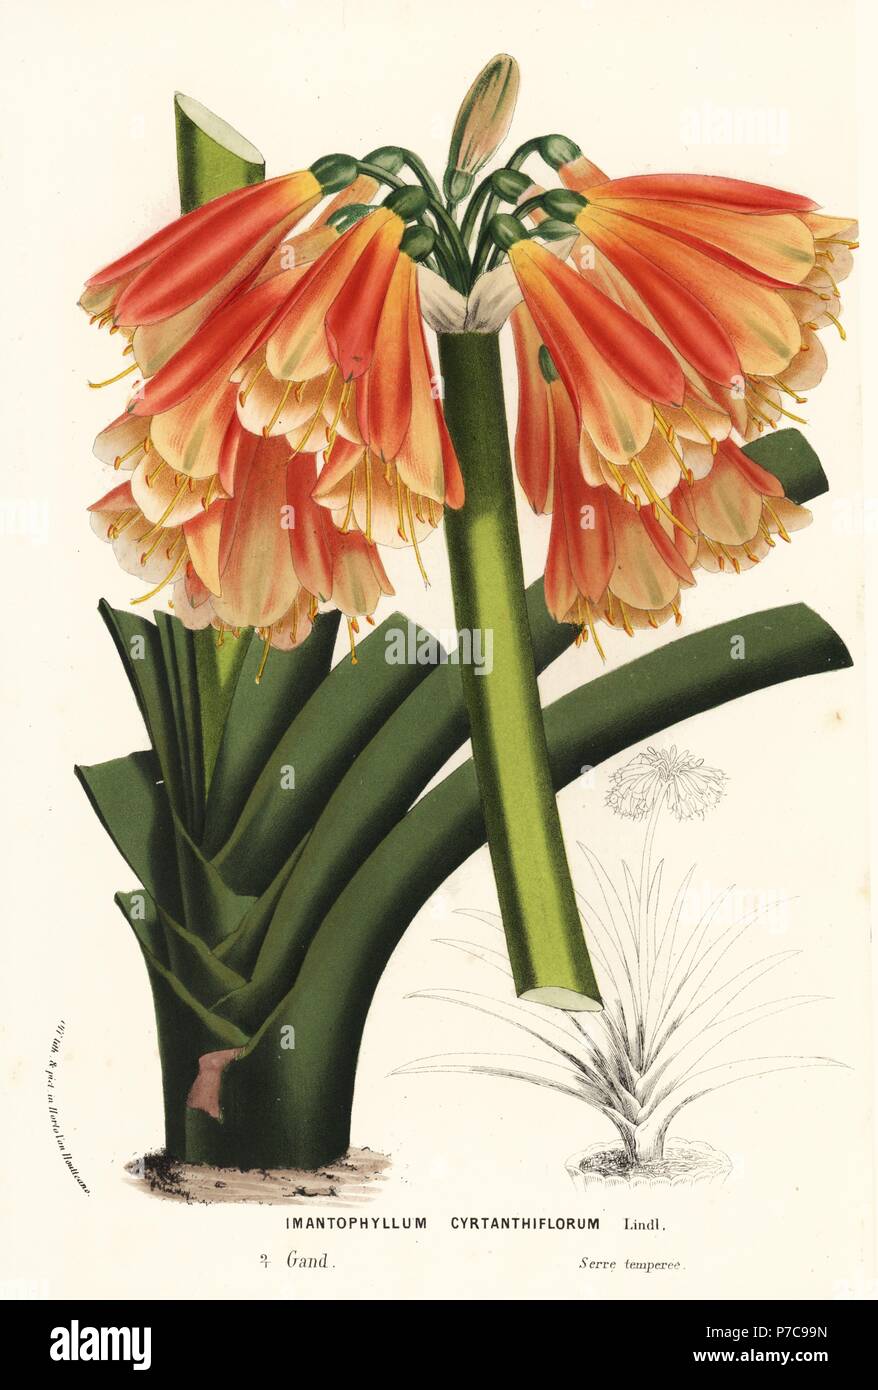 Clivia cyrtanthiflora, hybrid of Clivia miniata and Clivia nobilis (Imantophyllum cyrtanthiflorum). Handcoloured lithograph from Louis van Houtte and Charles Lemaire's Flowers of the Gardens and Hothouses of Europe, Flore des Serres et des Jardins de l'Europe, Ghent, Belgium, 1870. Stock Photo